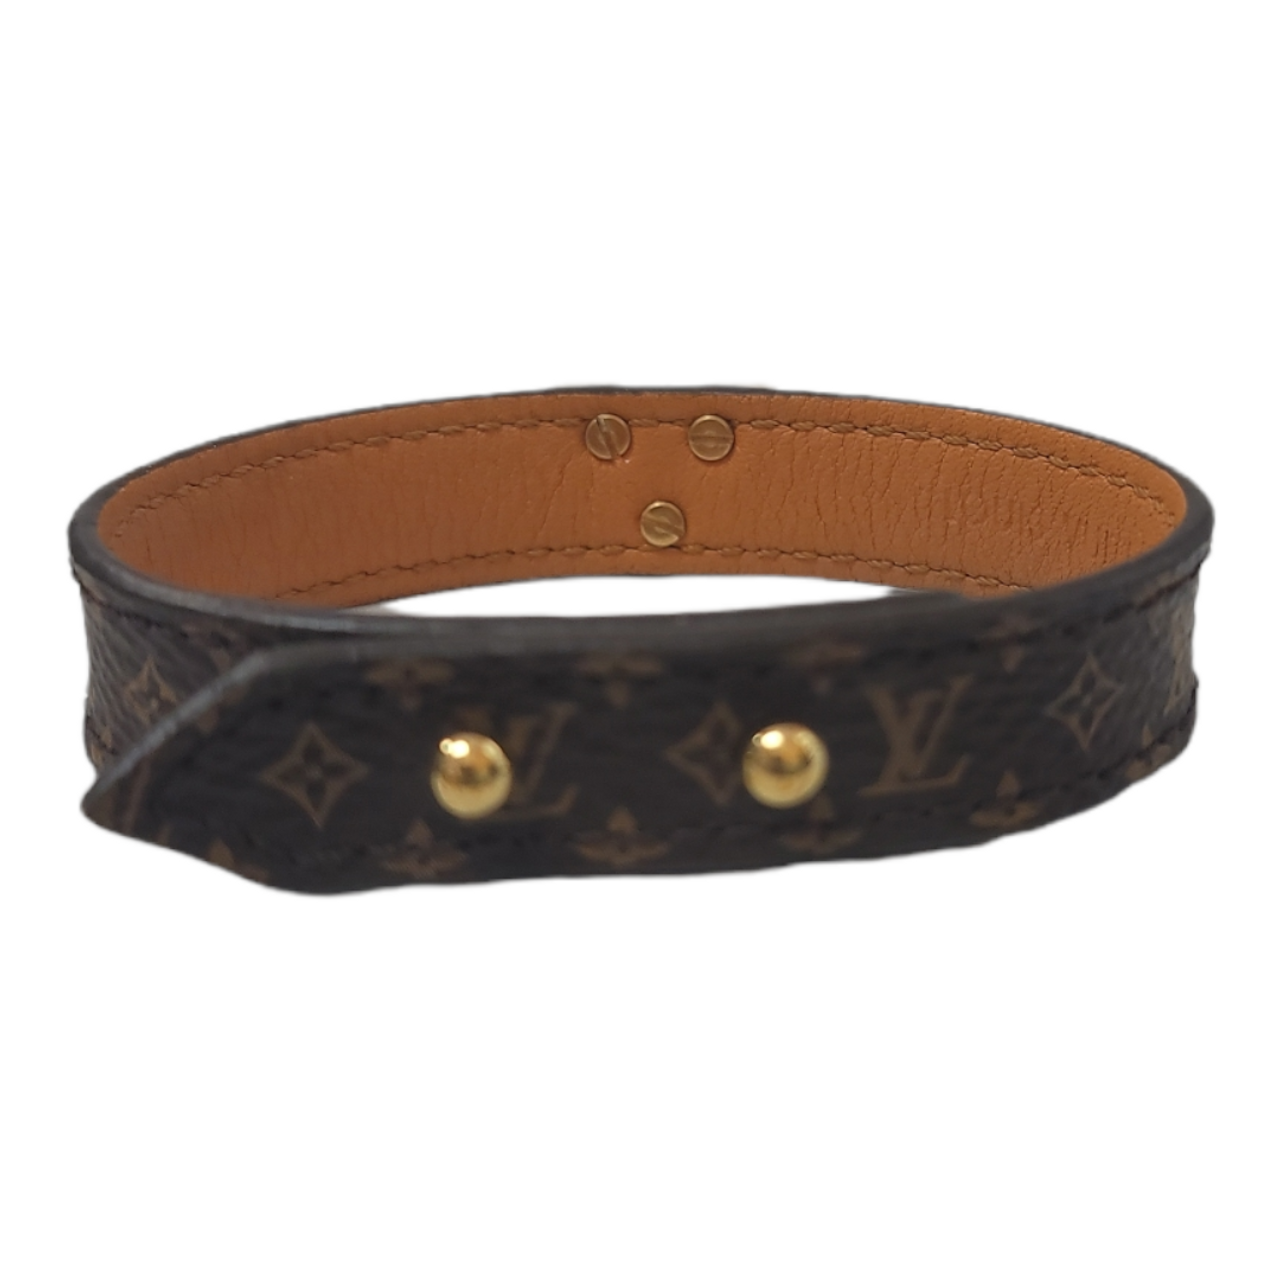 Essential V Bracelet By LOUIS VUITTON 17 - Annie Rooster's Sally